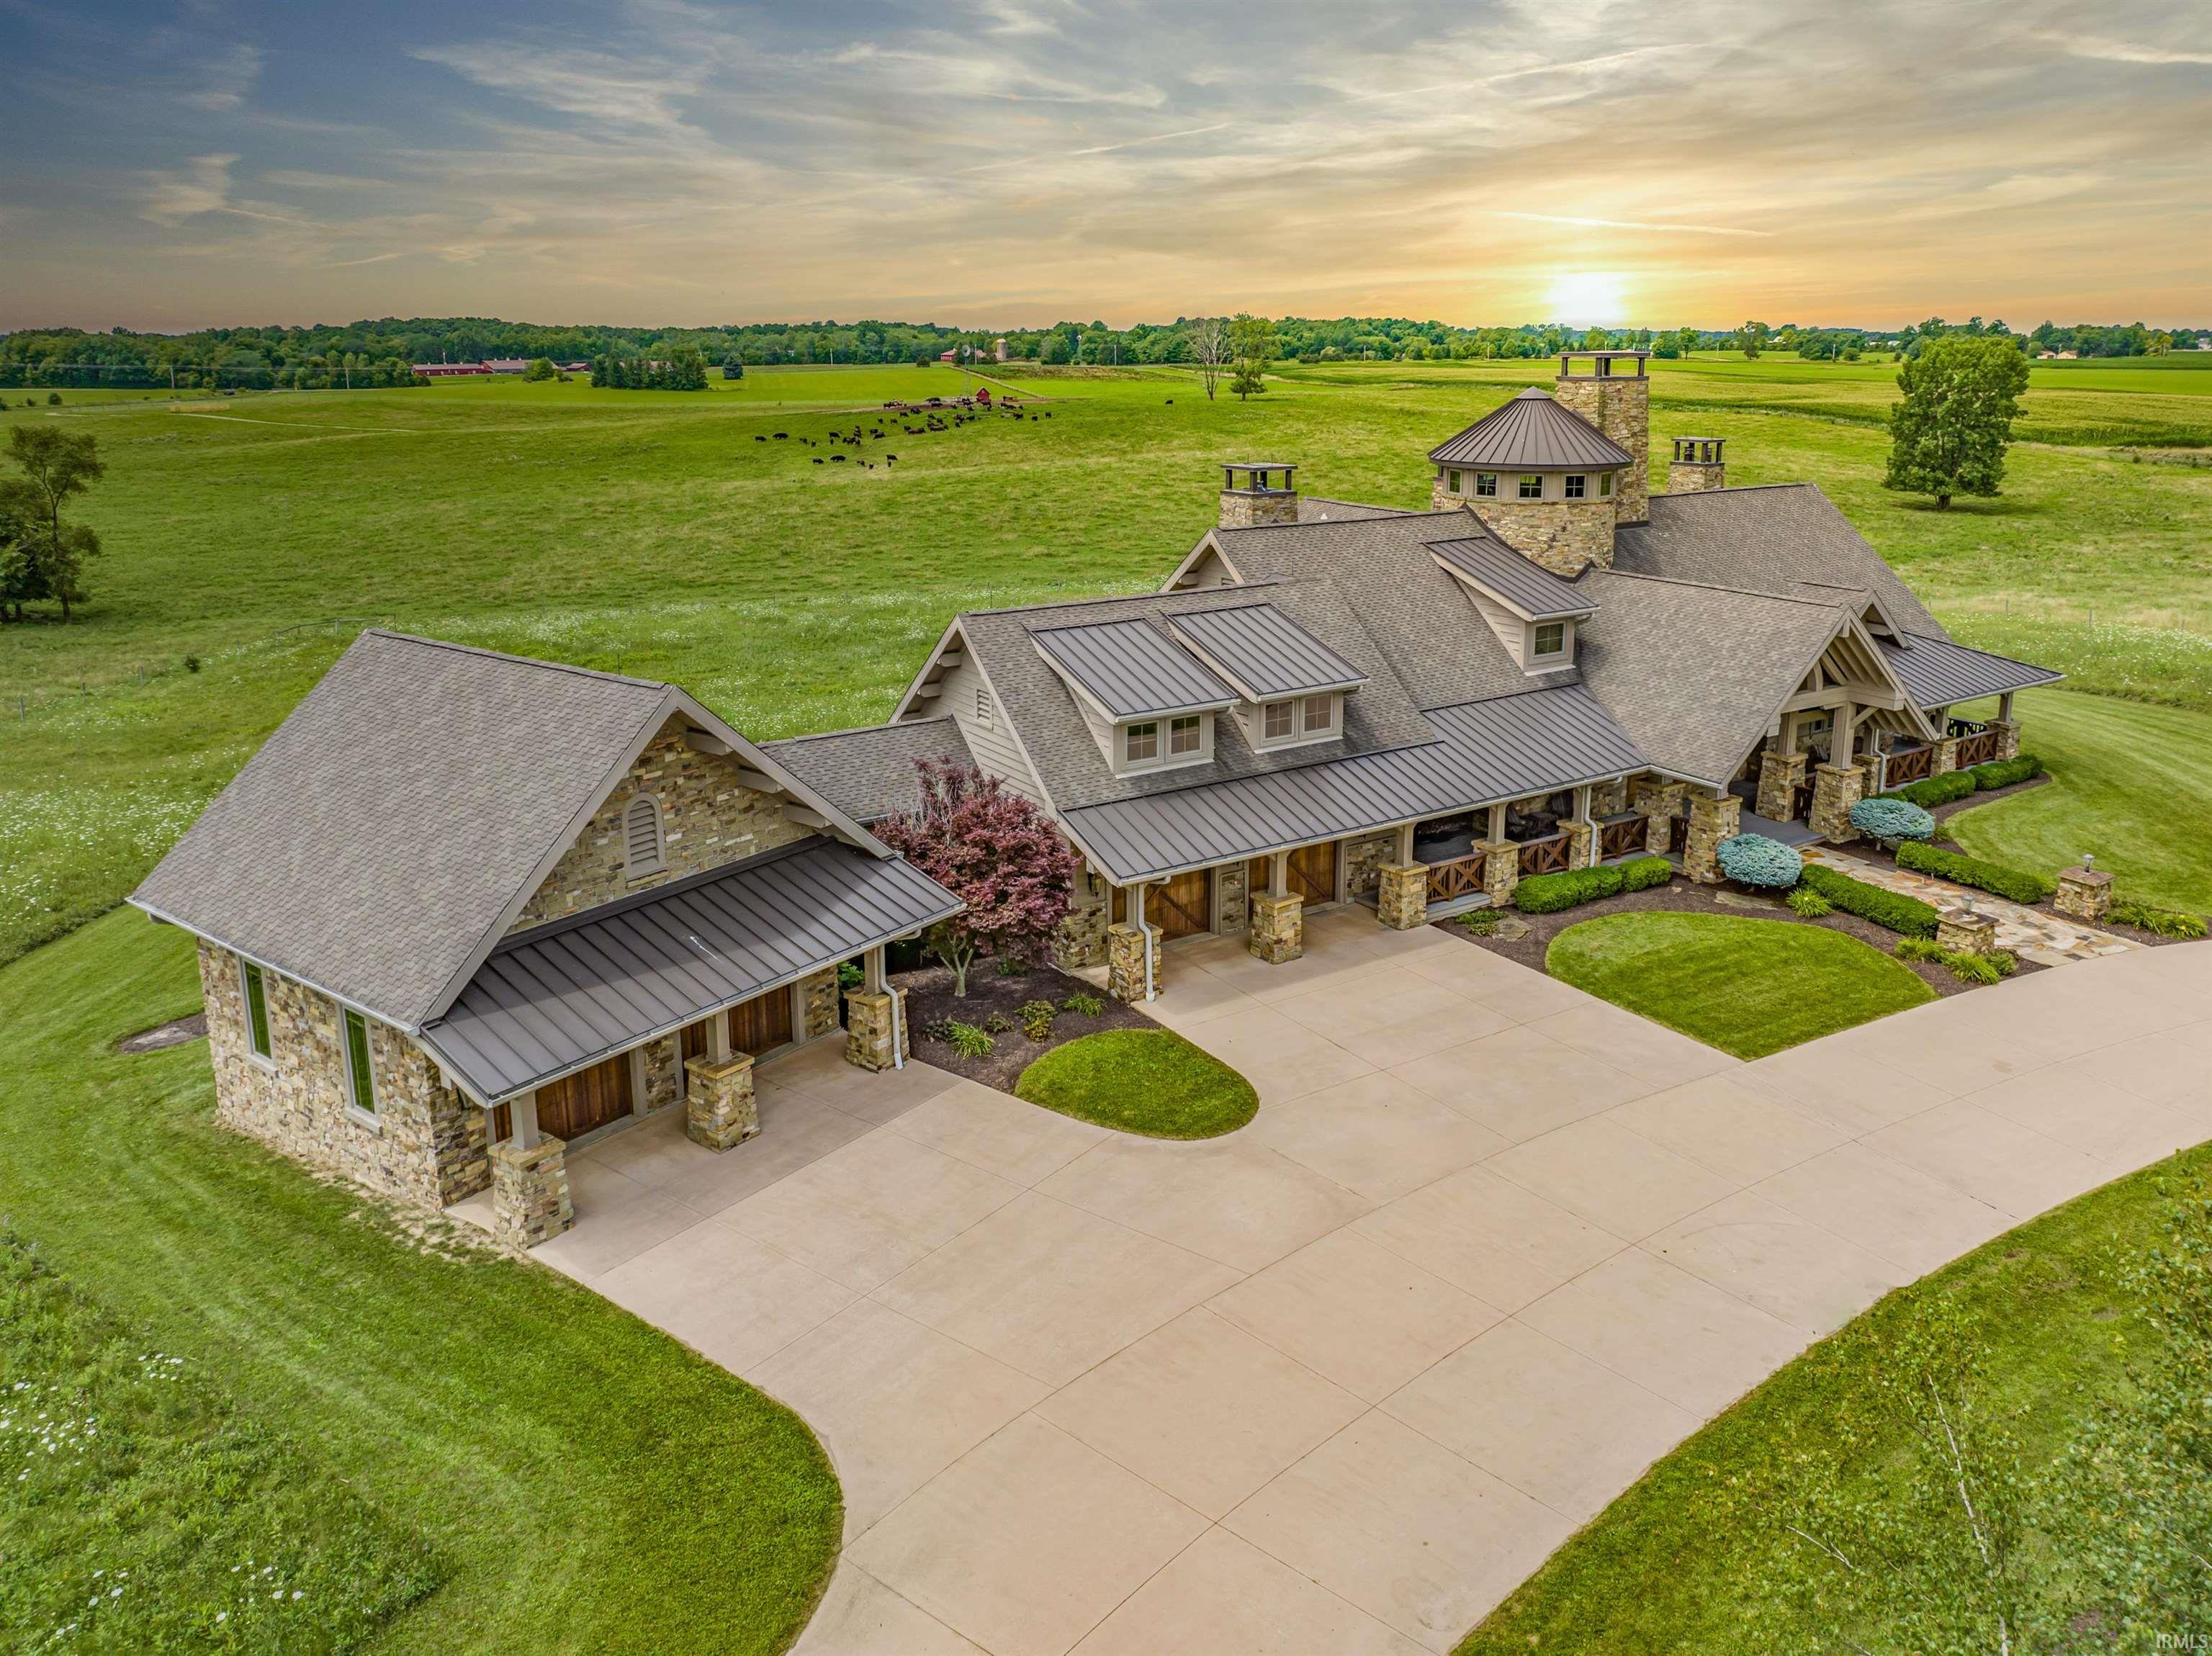 Welcome home to your own private paradise with a spectacular custom built 5,478 sq. ft. ranch on a walk-out lower level nestled on 13+ acres and overlooking nearly 100 additional acres of beautiful, lush pasture and wooded areas (facing west for sunsets!). Designed by a renowned Colorado architect and built by high-end builder Joe Hildenbrand, this masterpiece features ultra-luxe finishes, unparalleled quality, and thoughtful design features throughout, including natural stone, finely milled wood, granite finishes, 5 fireplaces, ultra-wide stairways, 13’ doorways, stunning wood trim, wood and vaulted ceilings with beams, and oversized windows and doors with sweeping views of the property.  The main floor features extra wide plank wood floors, a cupola 2-story dining room/foyer w/wood ceiling, a sunken family room w/vaulted ceiling and beams, an office/library w/coffered ceiling and more fabulous wood detail, guest powder room, large mud room/laundry/prep room w/storage galore, a chef’s dream kitchen, and a gracious primary bedroom en-suite featuring stone fireplace, private balcony, 2 gracious closets, walk-in stone-tiled shower, custom double-vanity and heated floor. The gourmet kitchen boasts a stone-faced wood-burning pizza oven, Wolf oven (8-burner+) w/hood, Jenn-air fridge drawers cabinet-faced Sub-zero fridge w/freezer drawers, 2 dishwashers, warming drawers, gracious island w/2nd copper sink, and charming eat-in area that overlooks property. Downstairs, the quality continues with 2 additional en-suite bedrooms (w/stone fireplaces, heated bath floors and private patios!), fitness area/sauna/full bath (with stackable washer dryer and steam shower!), elegant Tuscan-inspired wine room, and french doors leading to a stone patio. Sip a latte or glass of Vino on the maintenance free, Trex balconies or on the vast wrap-around porch. Extra bonus features include the 4-car heated garage w/storage walk-through, Tesla charger and generator. This is truly a meticulously crafted, prized property!